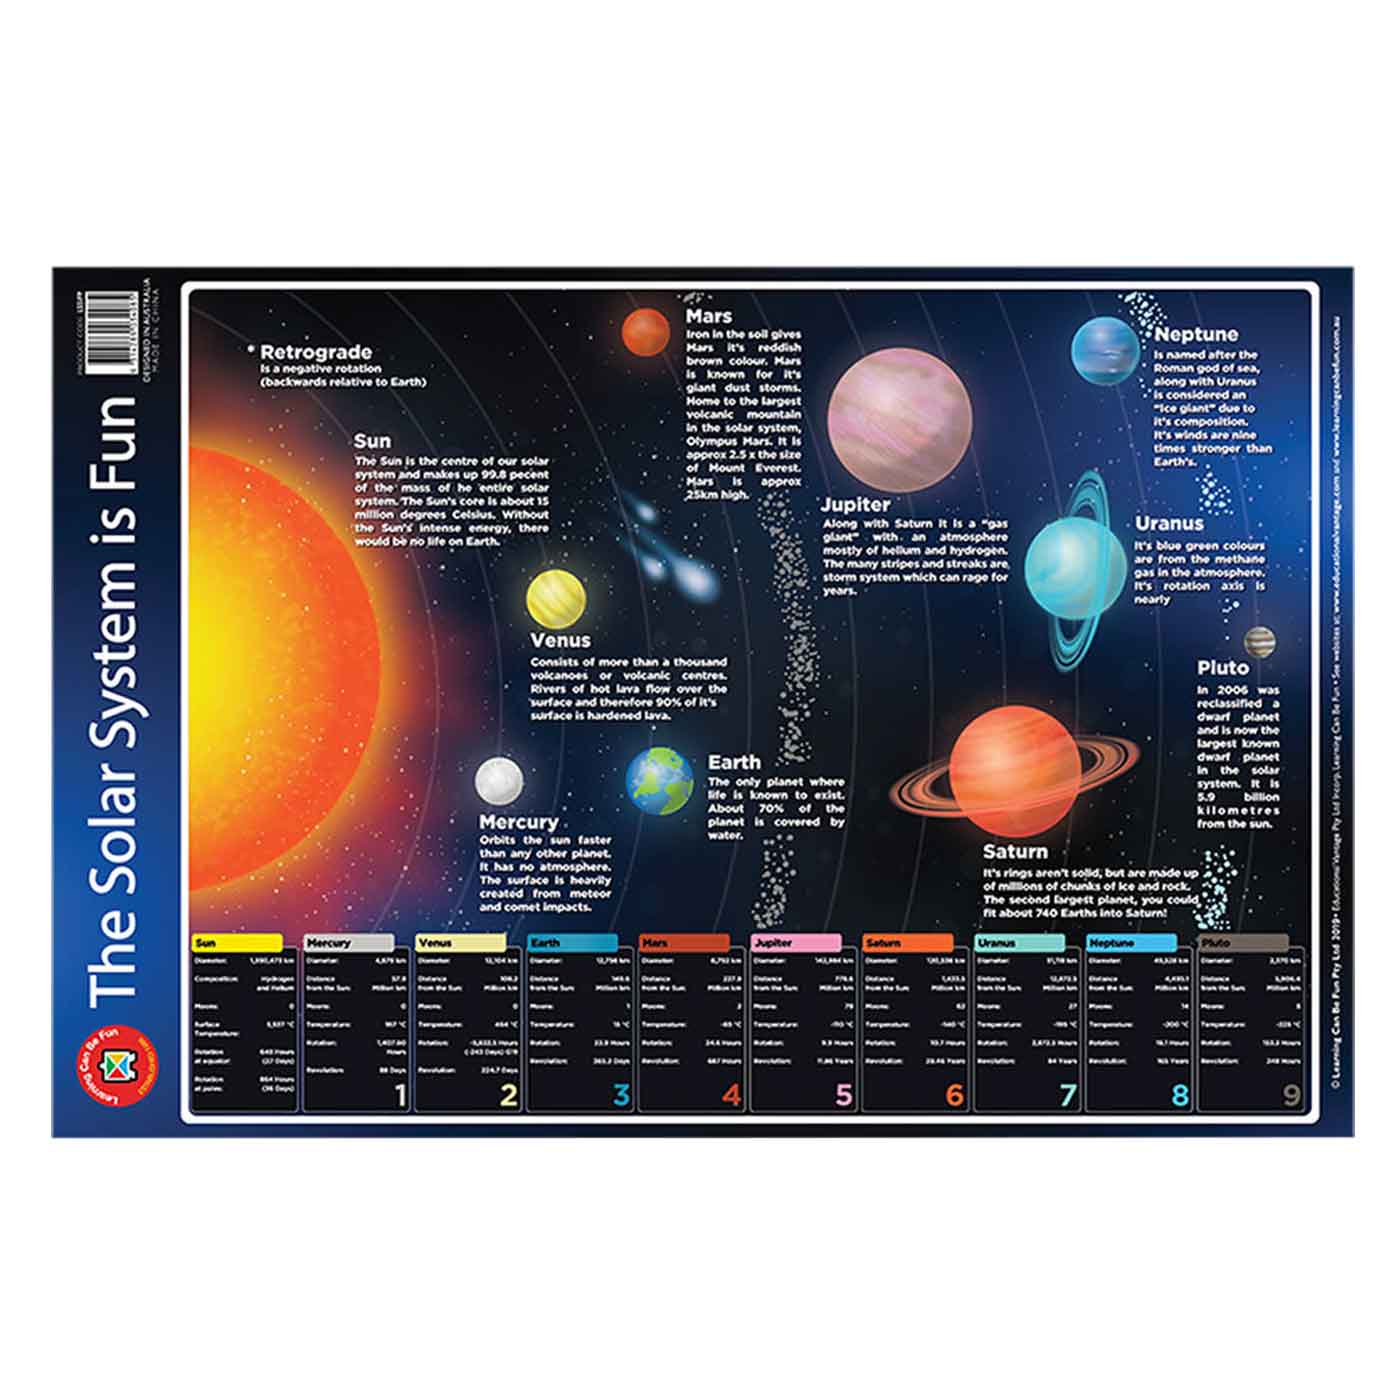 LCBF Wall Chart The Solar System Is Fun Poster 75 x 49.5cm